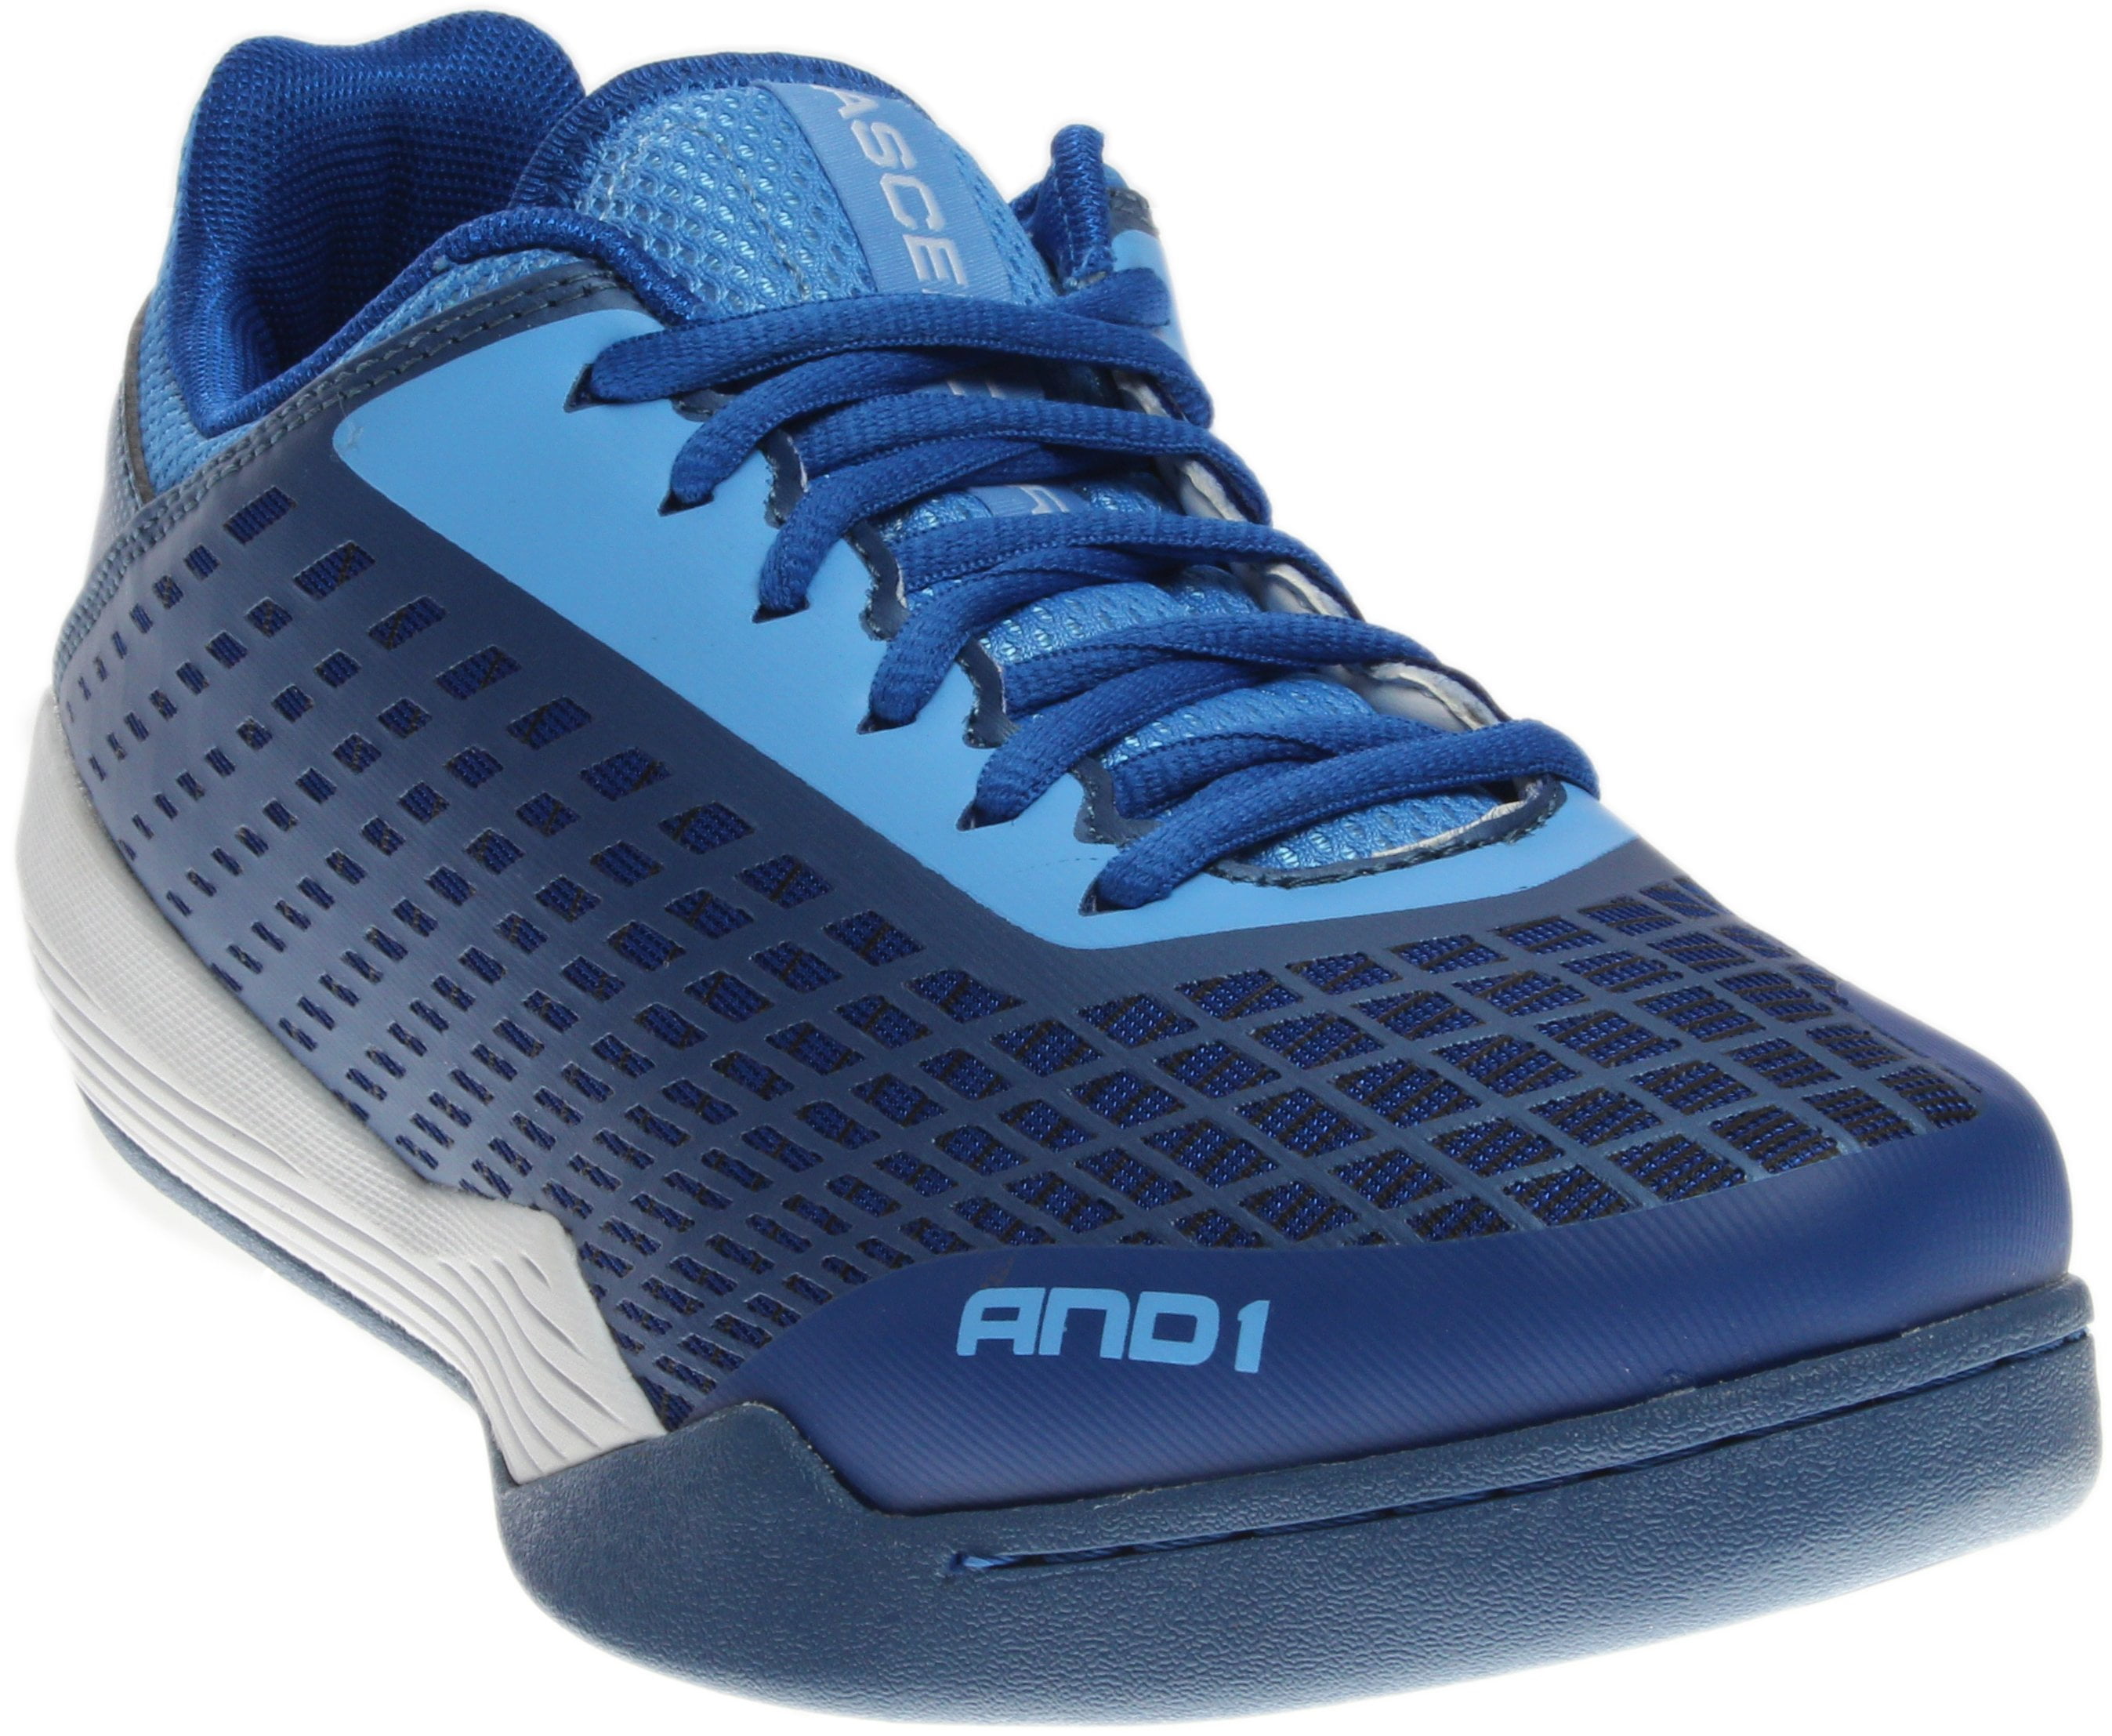 AND1 - And1 Mens Ascender Low 